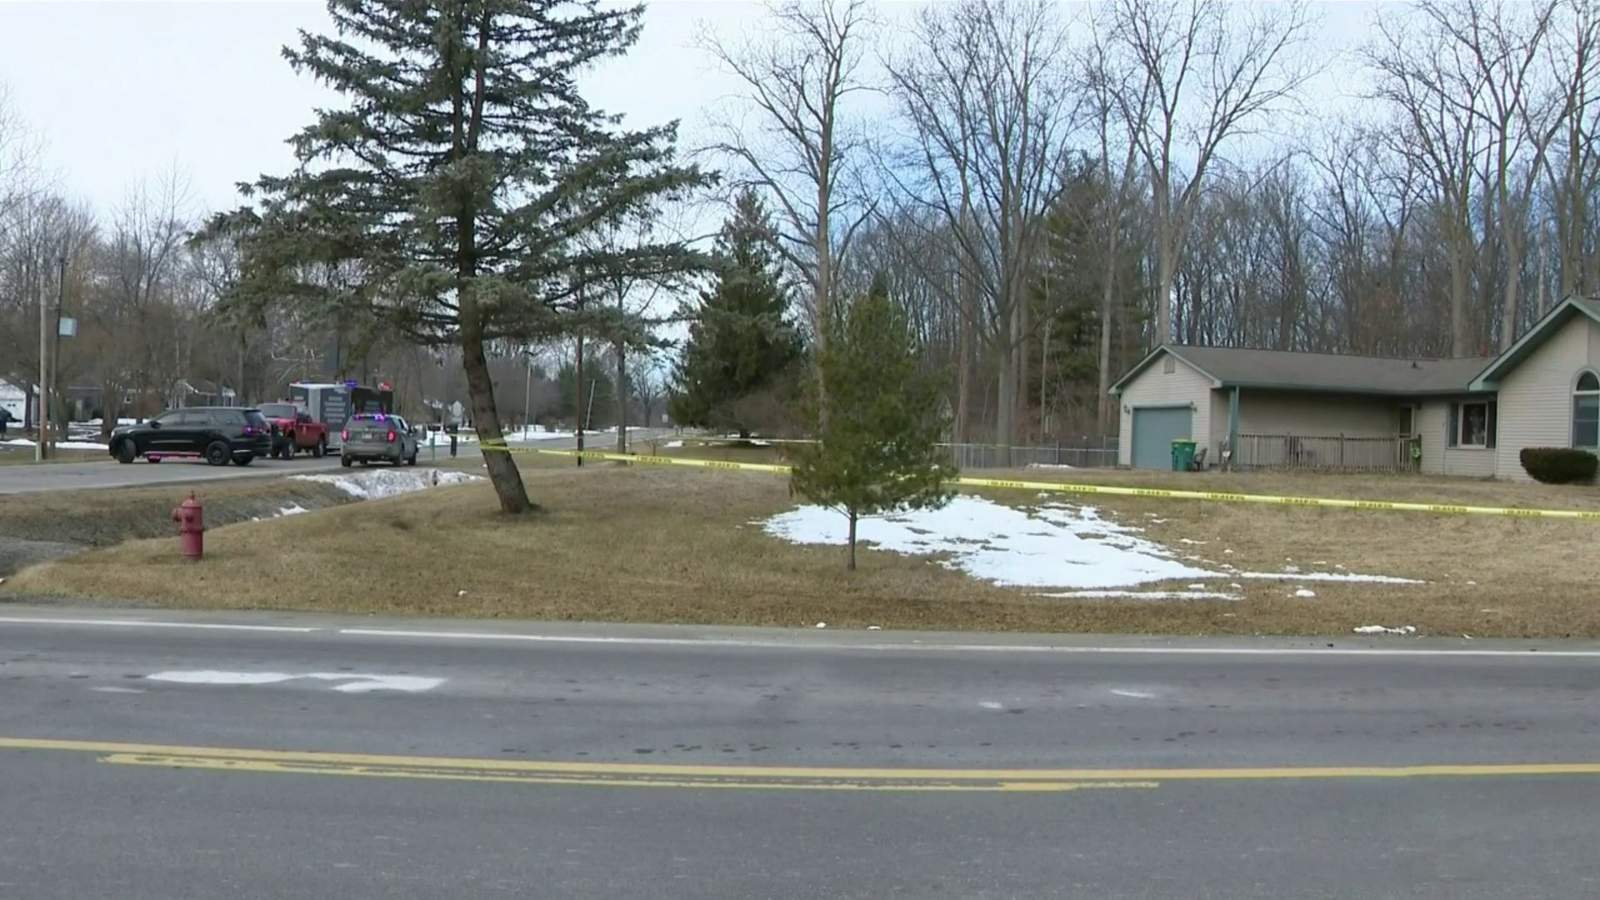 Huron Township mother fatally stabbed in altercation between son, parents